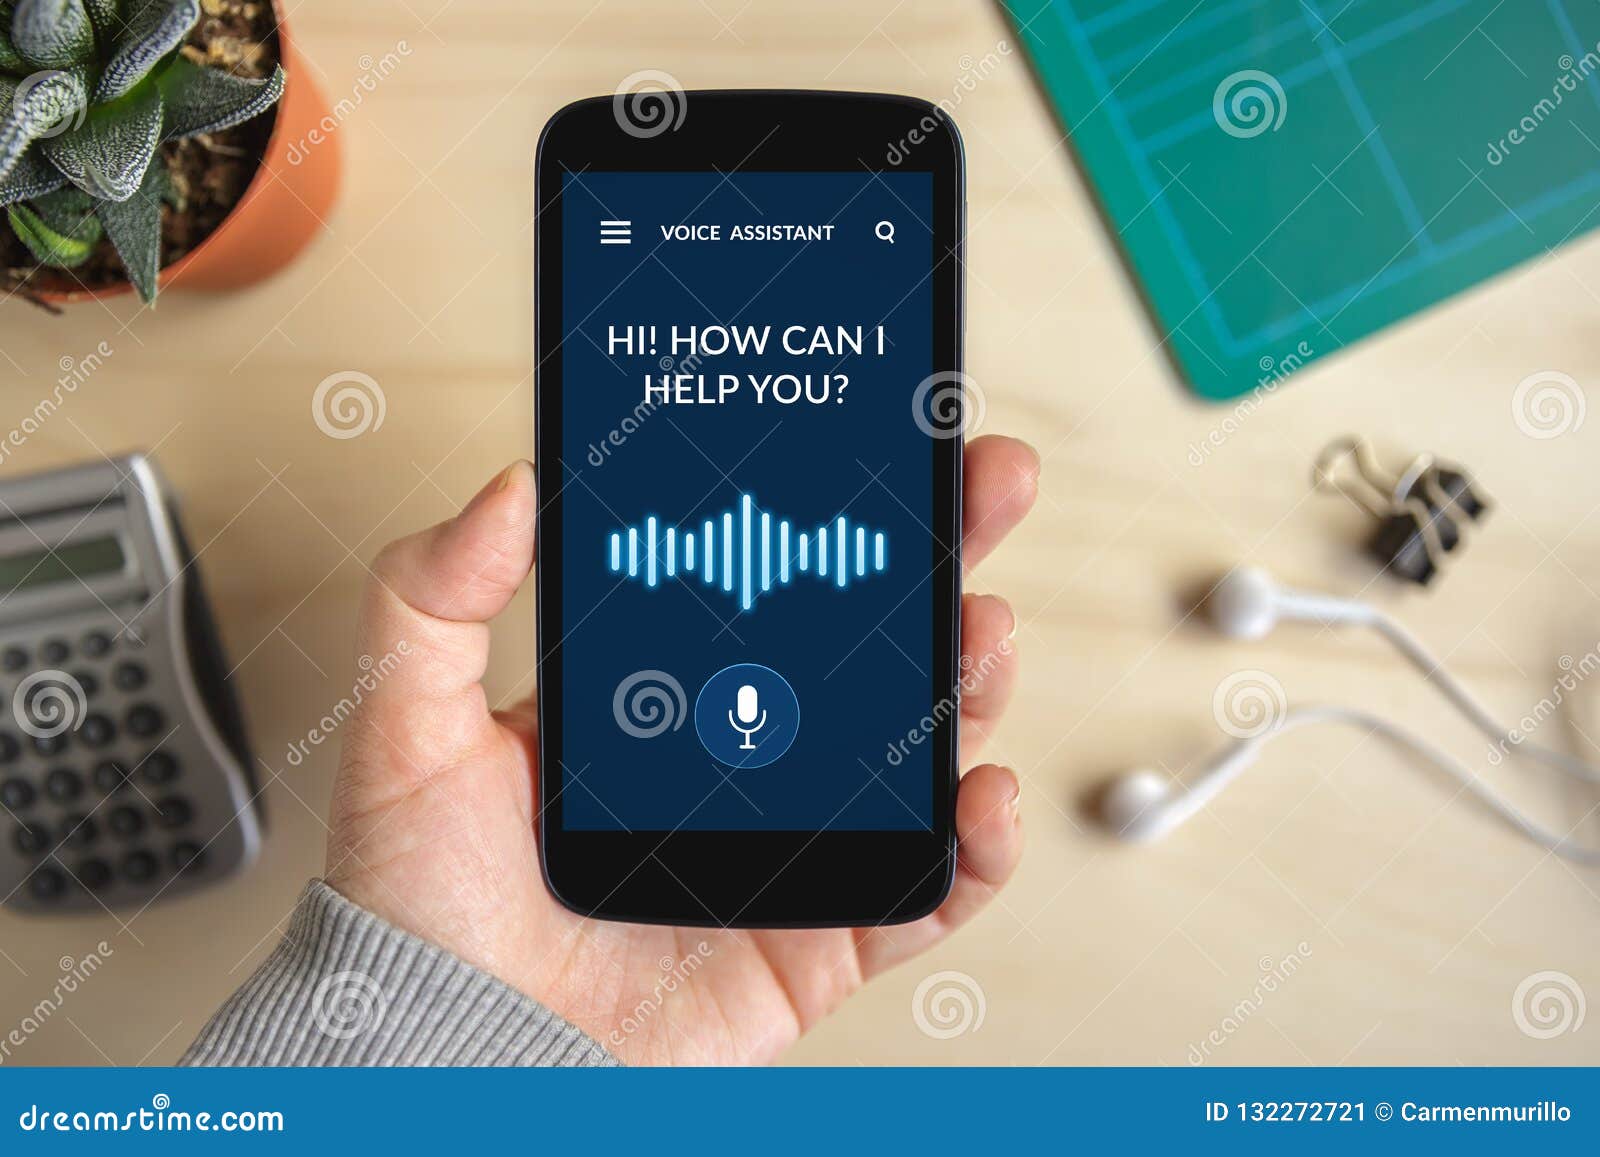 hand holding smart phone with voice assistant concept on screen